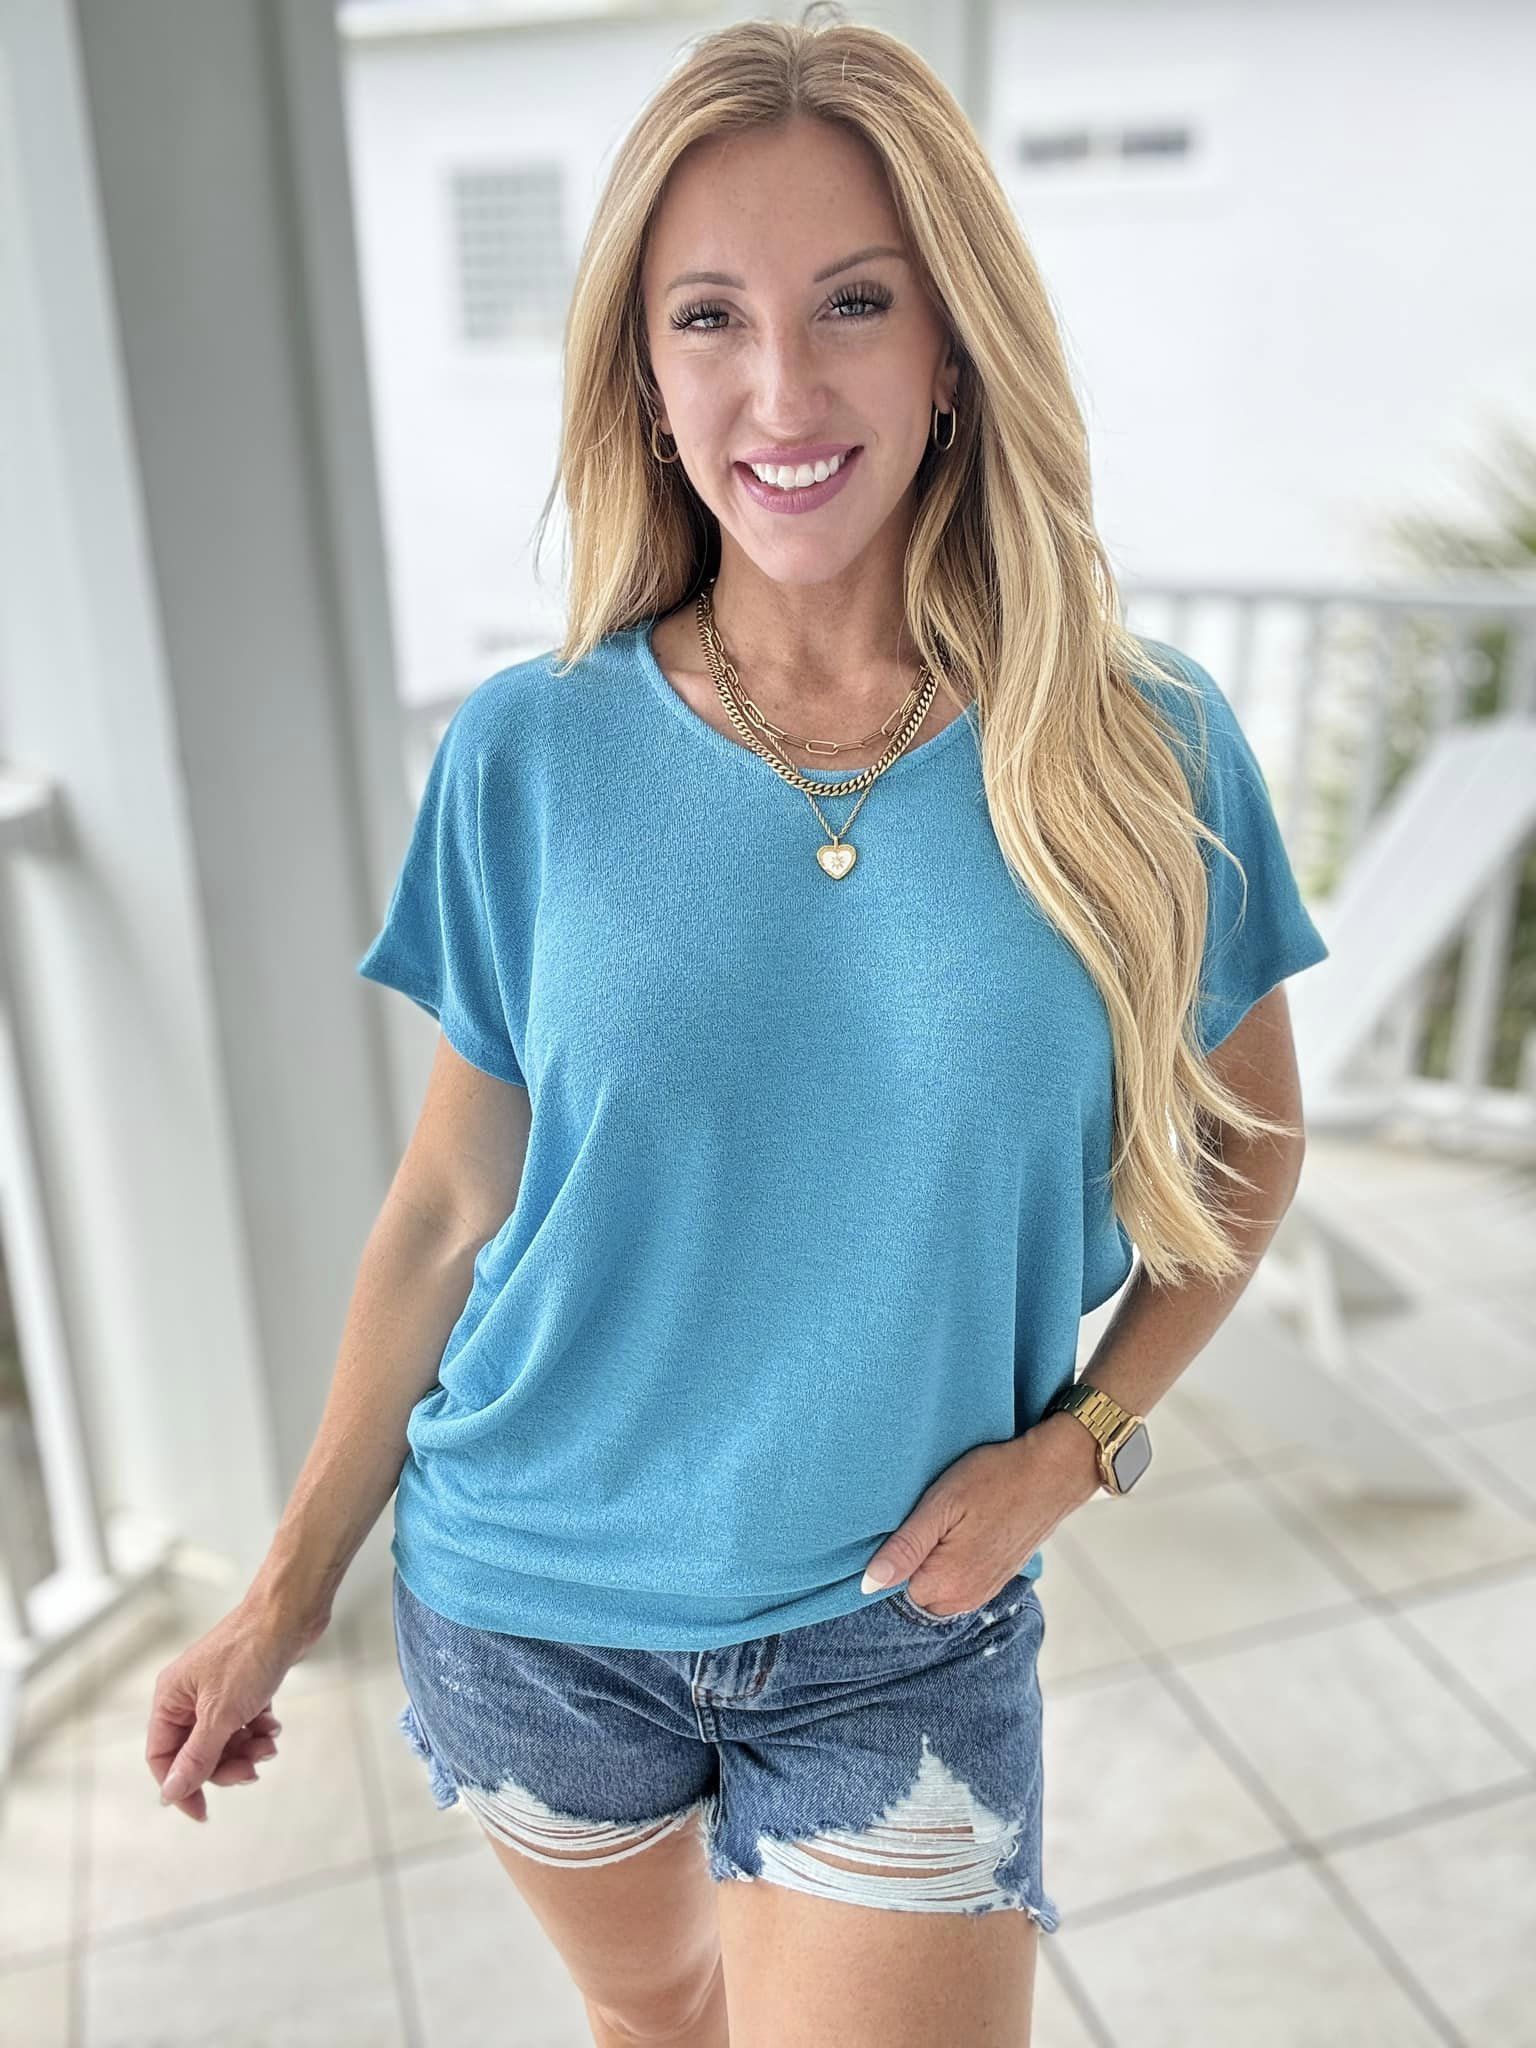 White Birch Short Sleeve Dolman Top in Turquoise Ave Shops